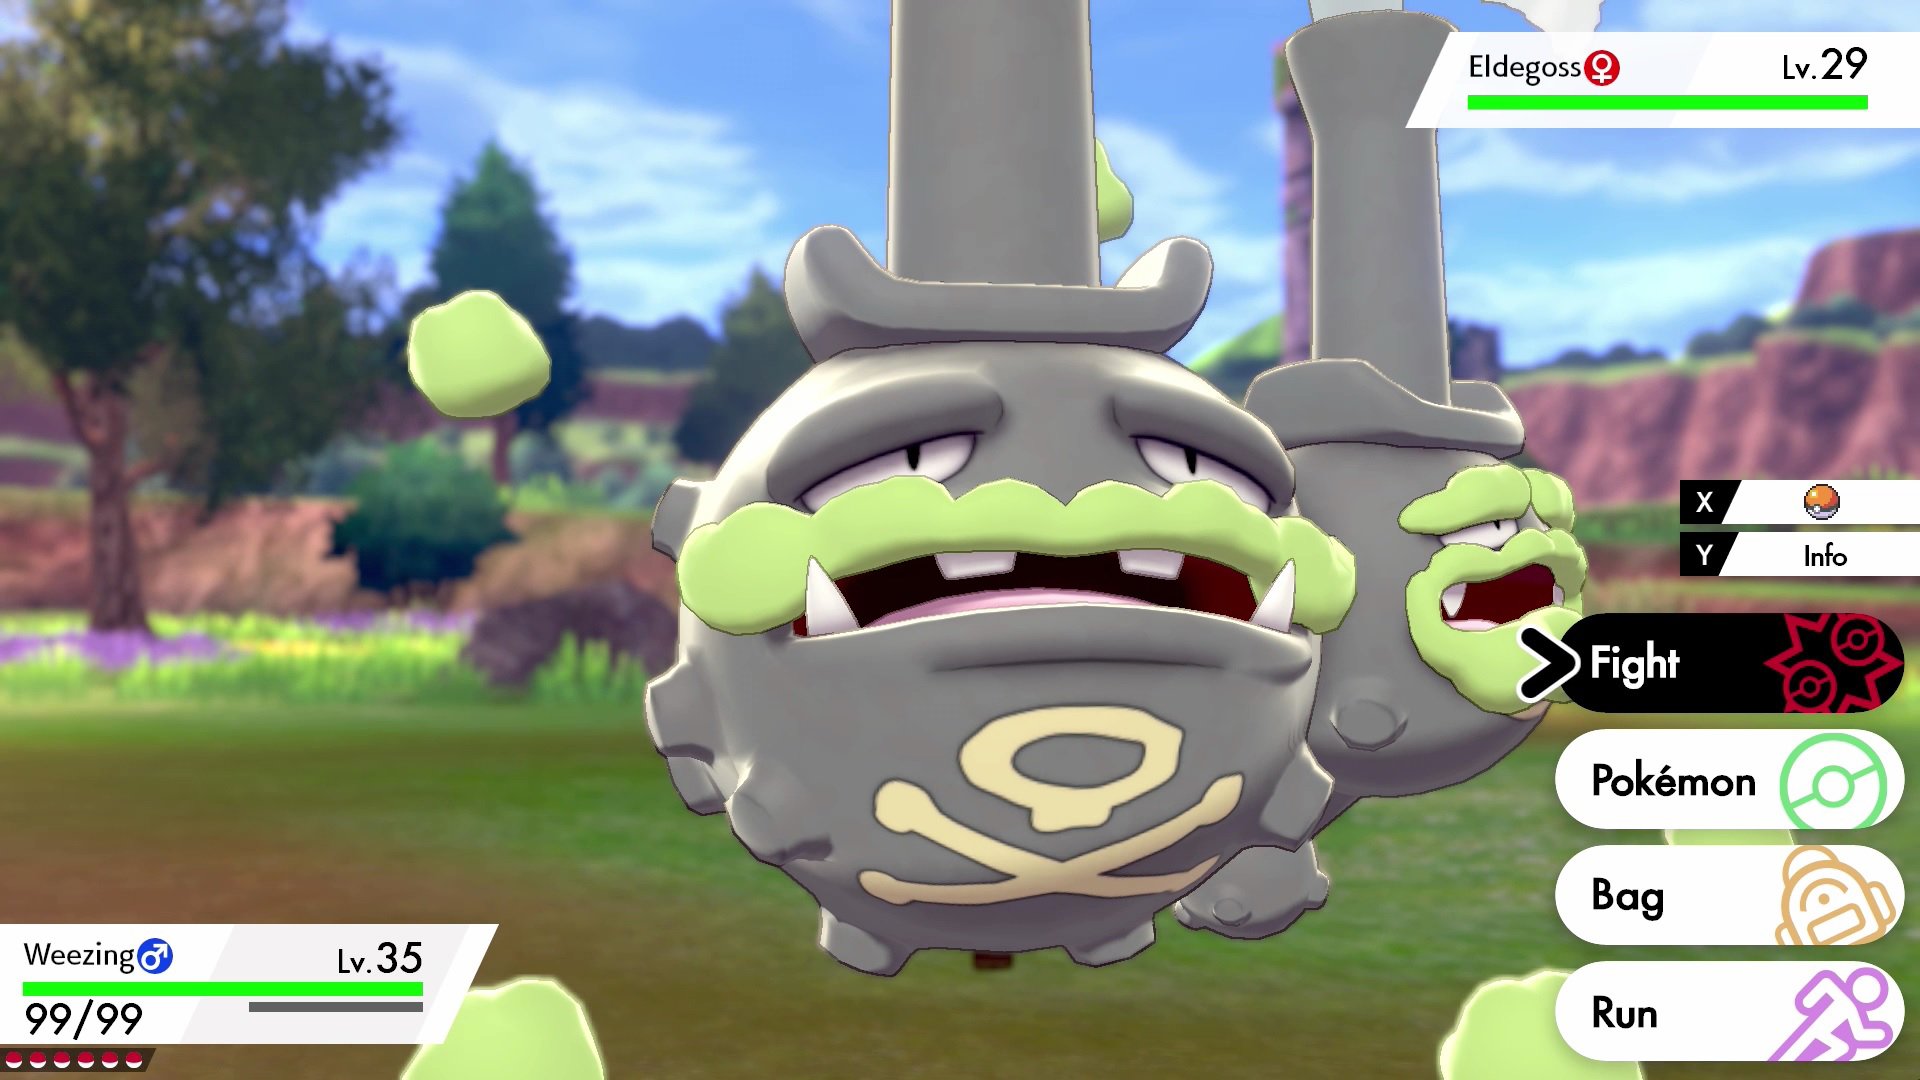 Review Roundup Pokemon Sword And Shield Brings The Series To New Heights Gameranx